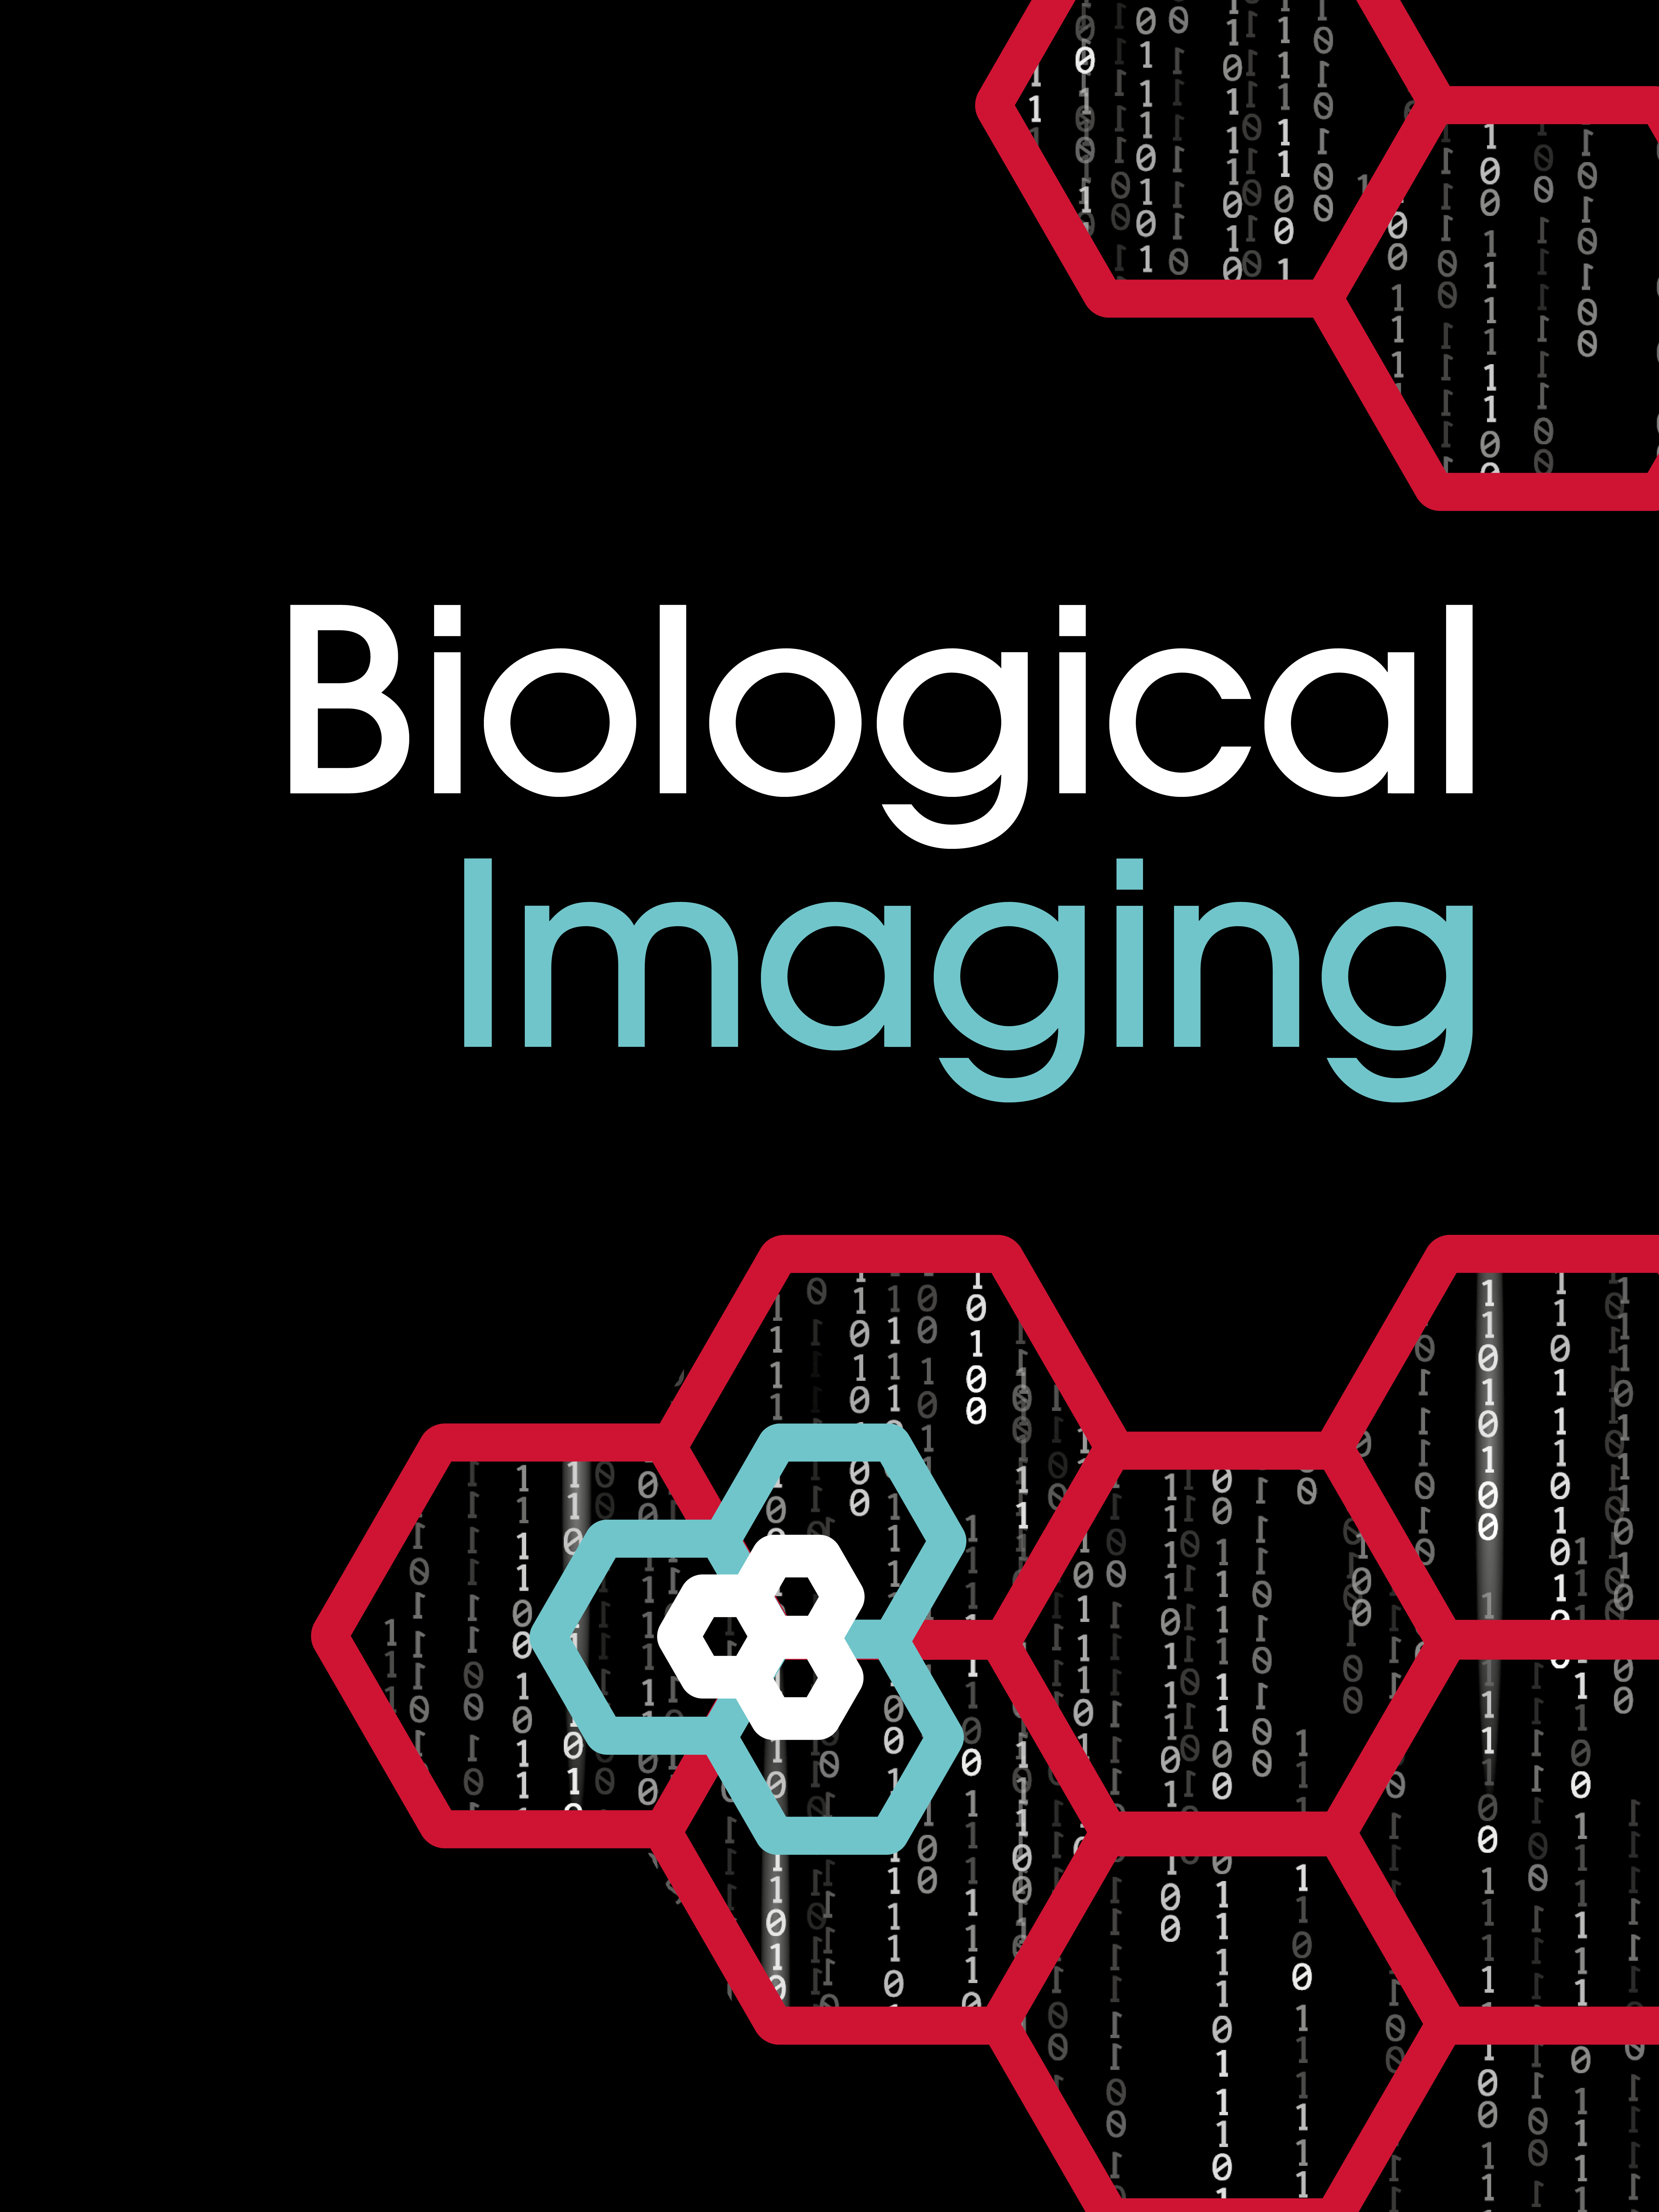 Deep Learning for automatic signal enhancement in biological imaging